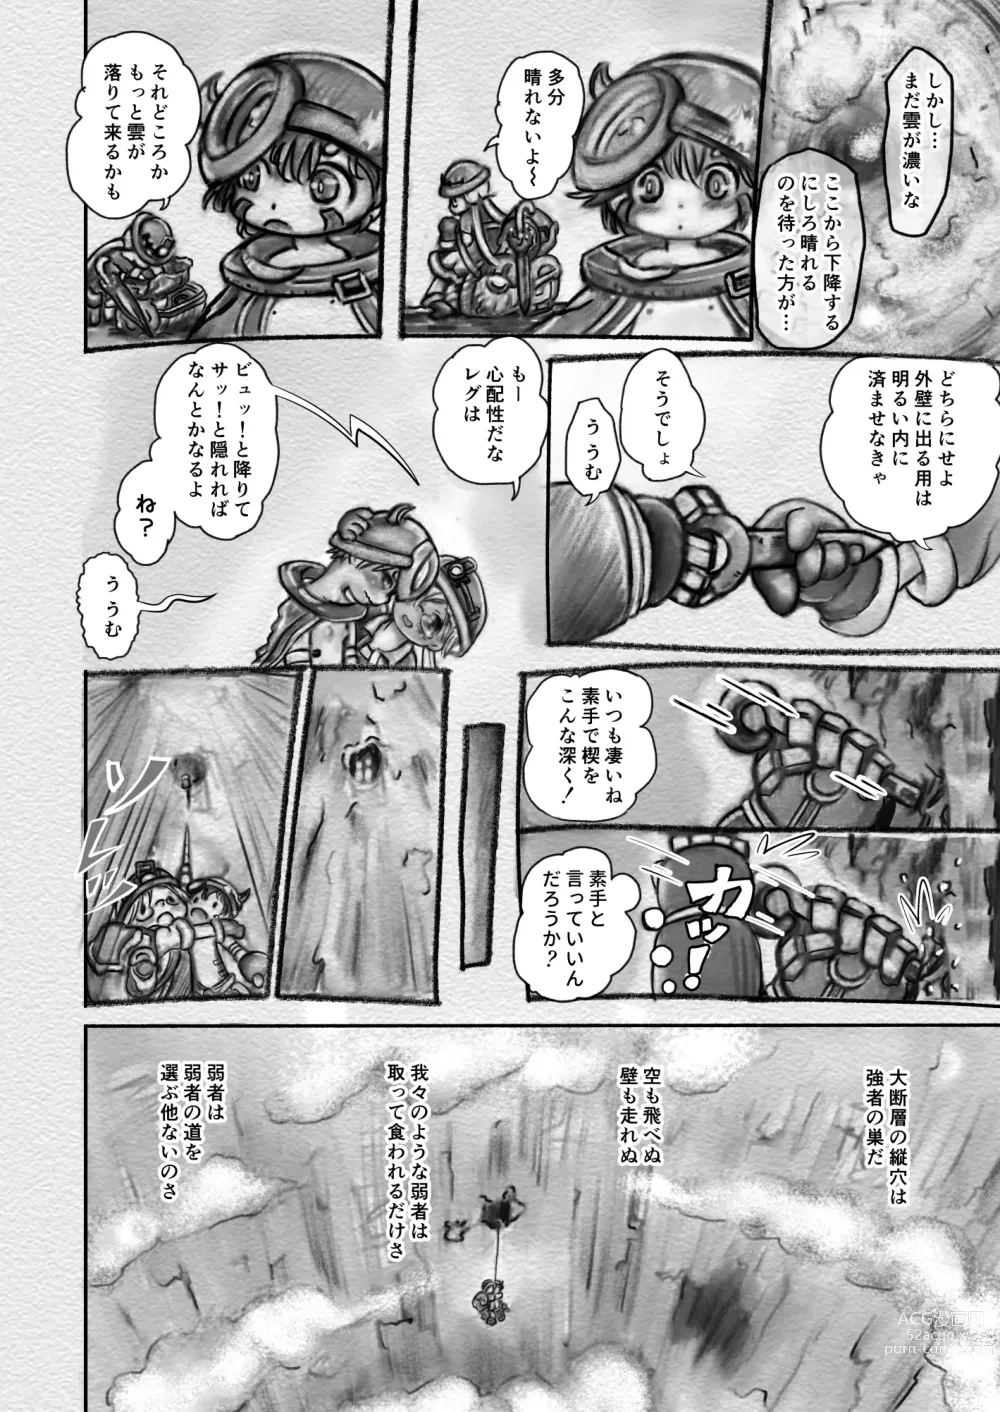 Page 6 of doujinshi Abyss Diver